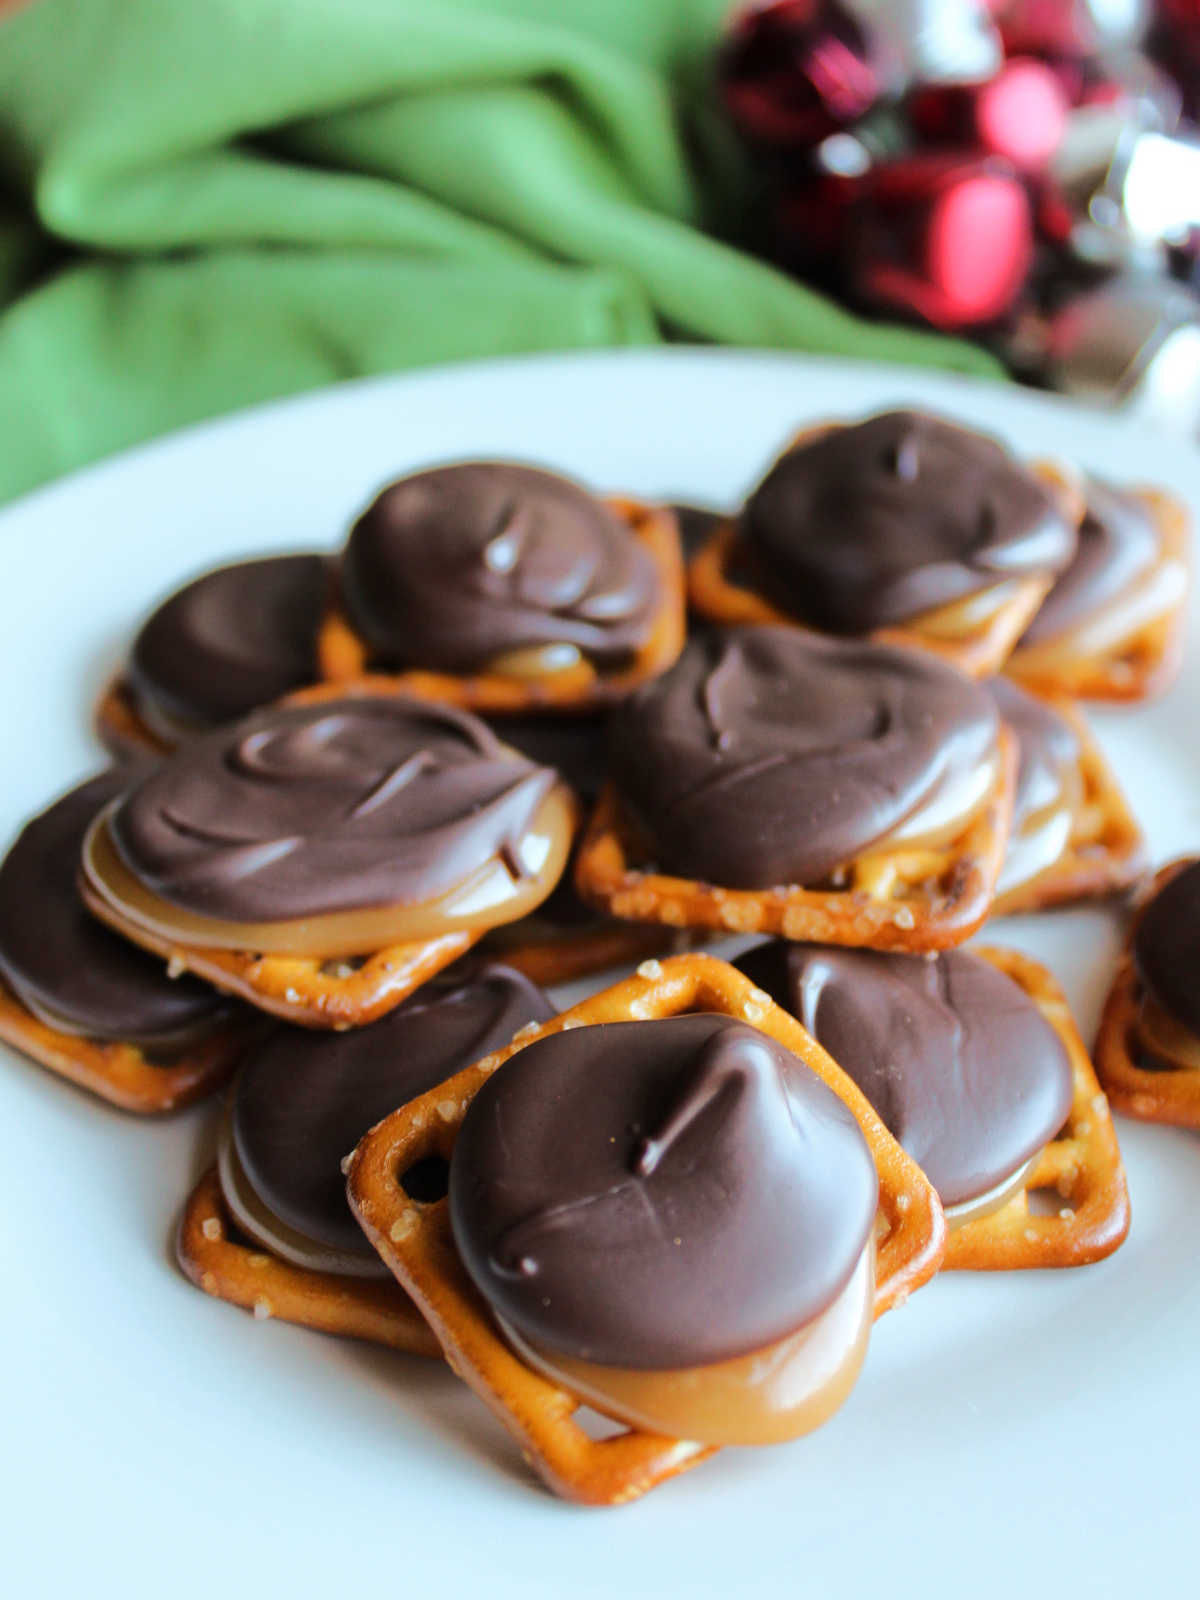 Plate of faux turtles made out of pretzels, homemade caramel, and chocolate, ready to eat. 